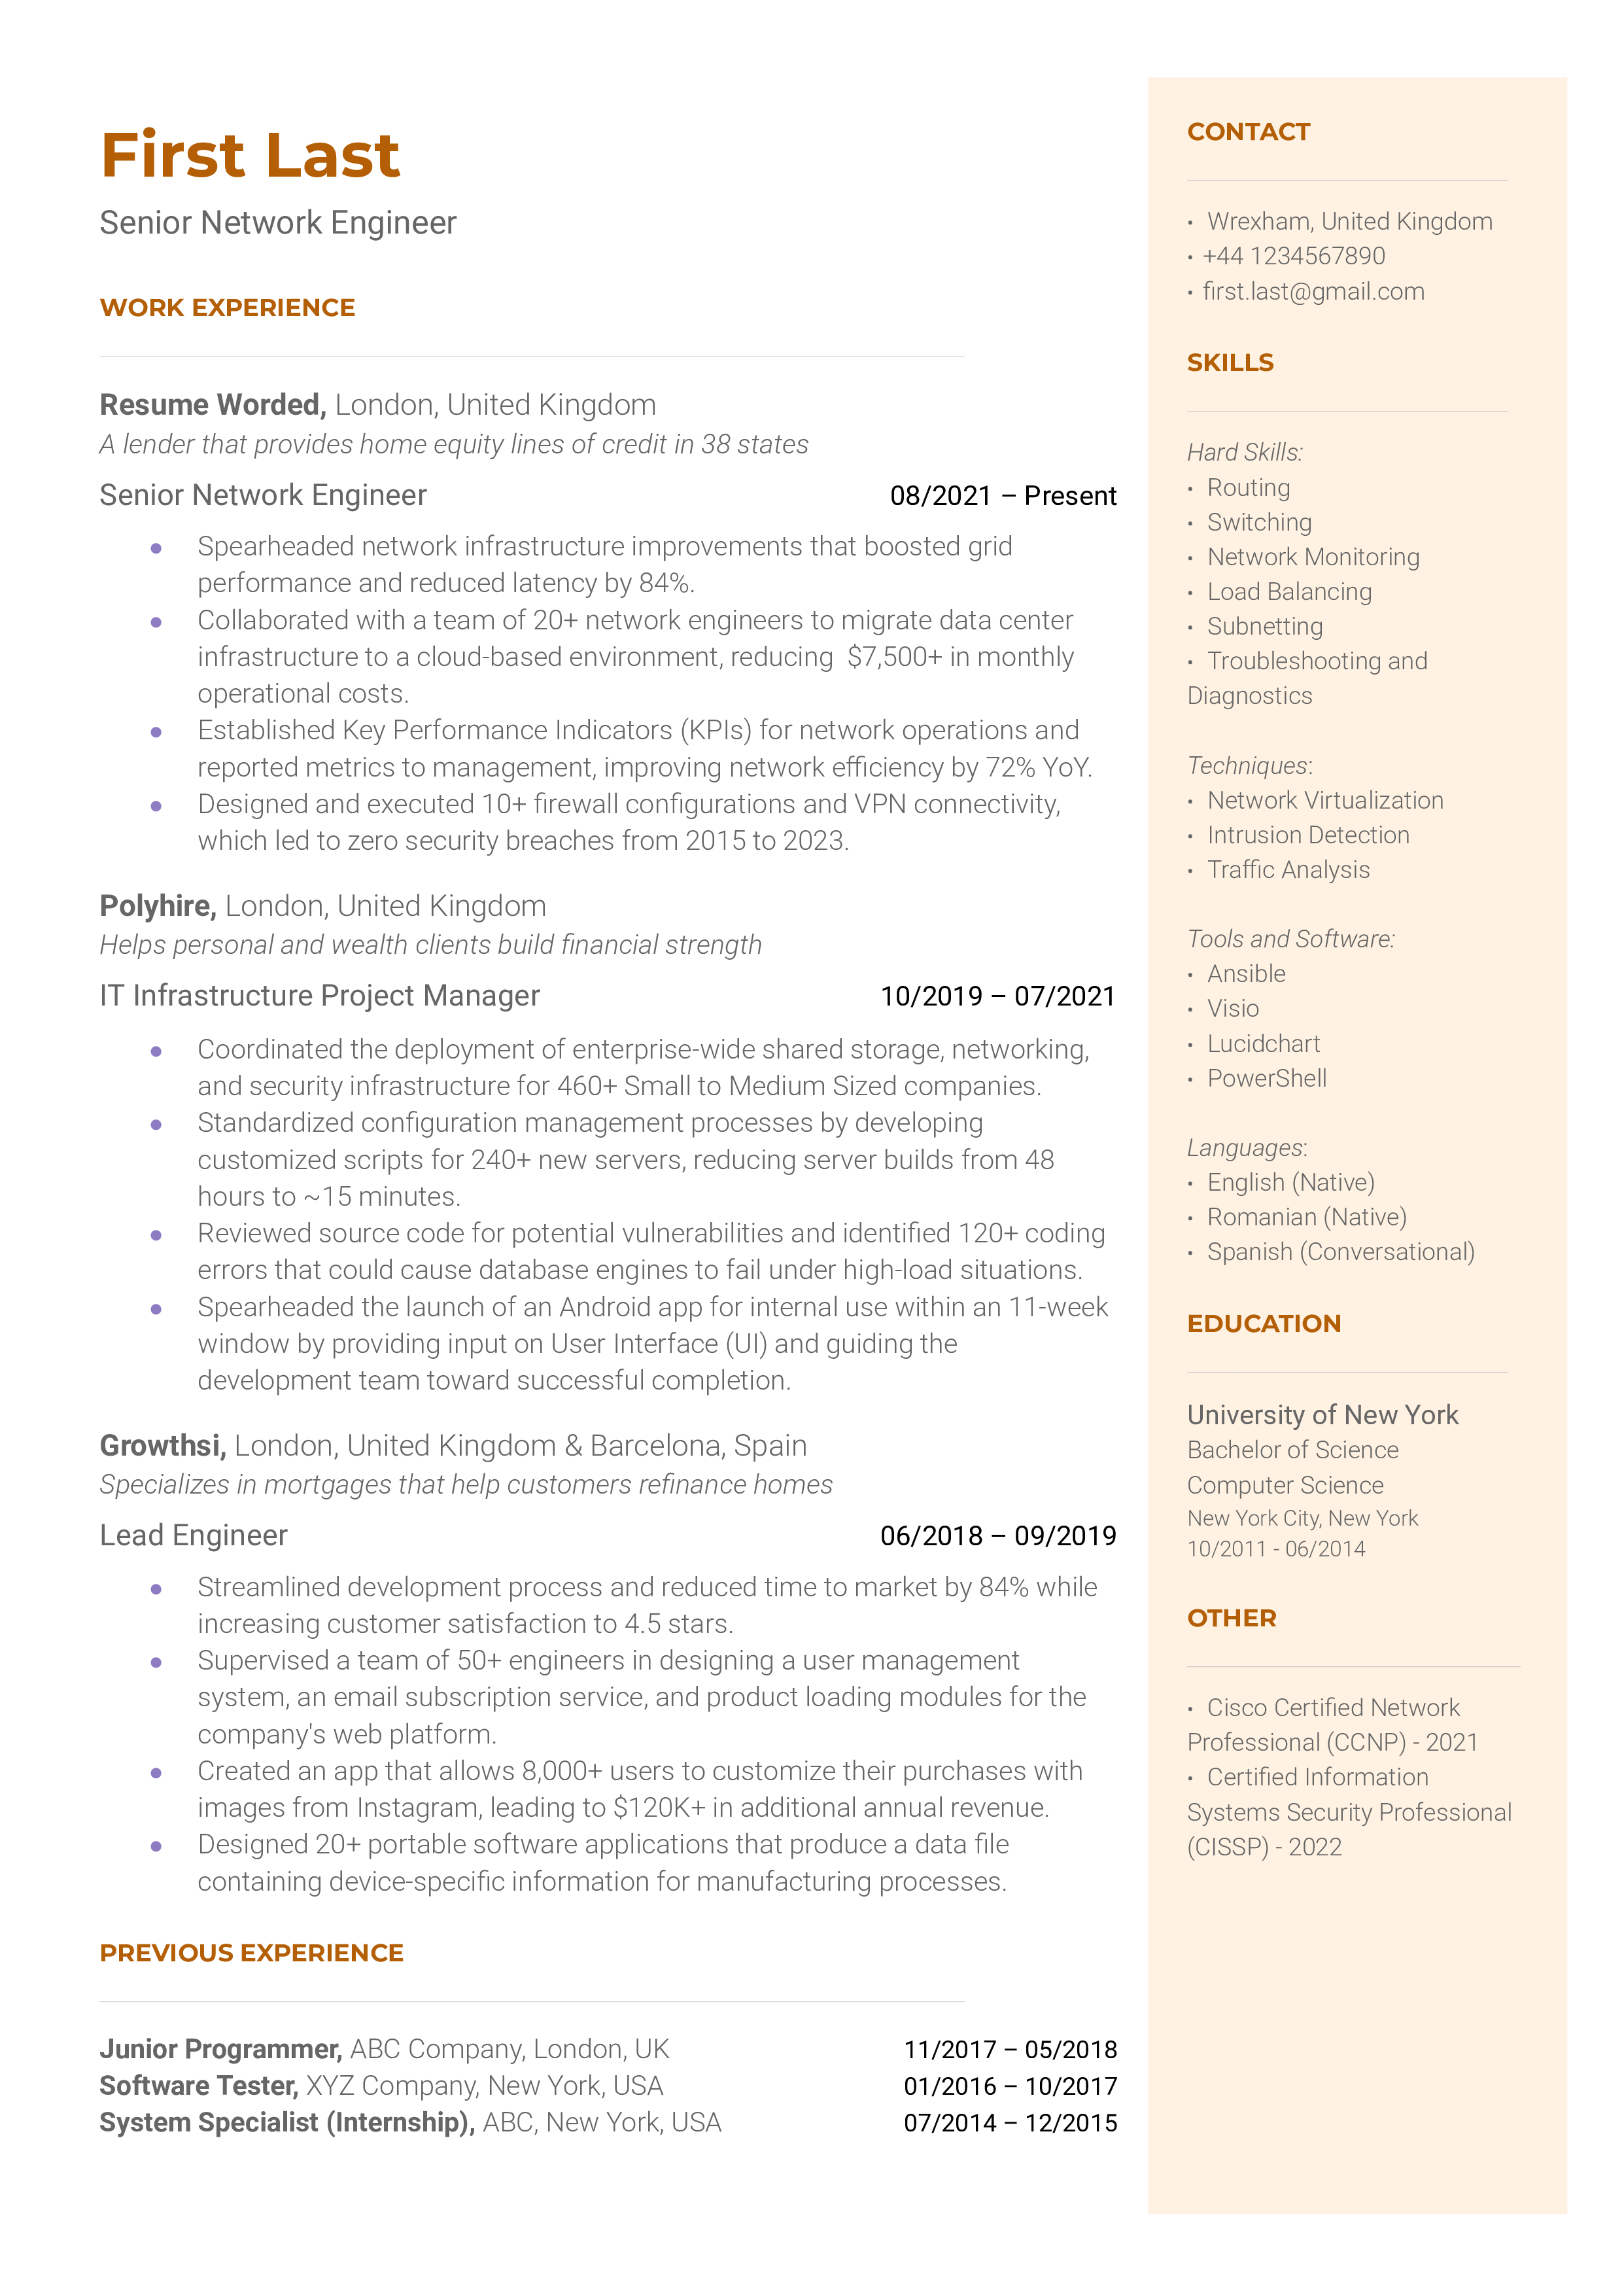 An example of a Senior Network Engineer's resume showcasing certifications and project management skills.